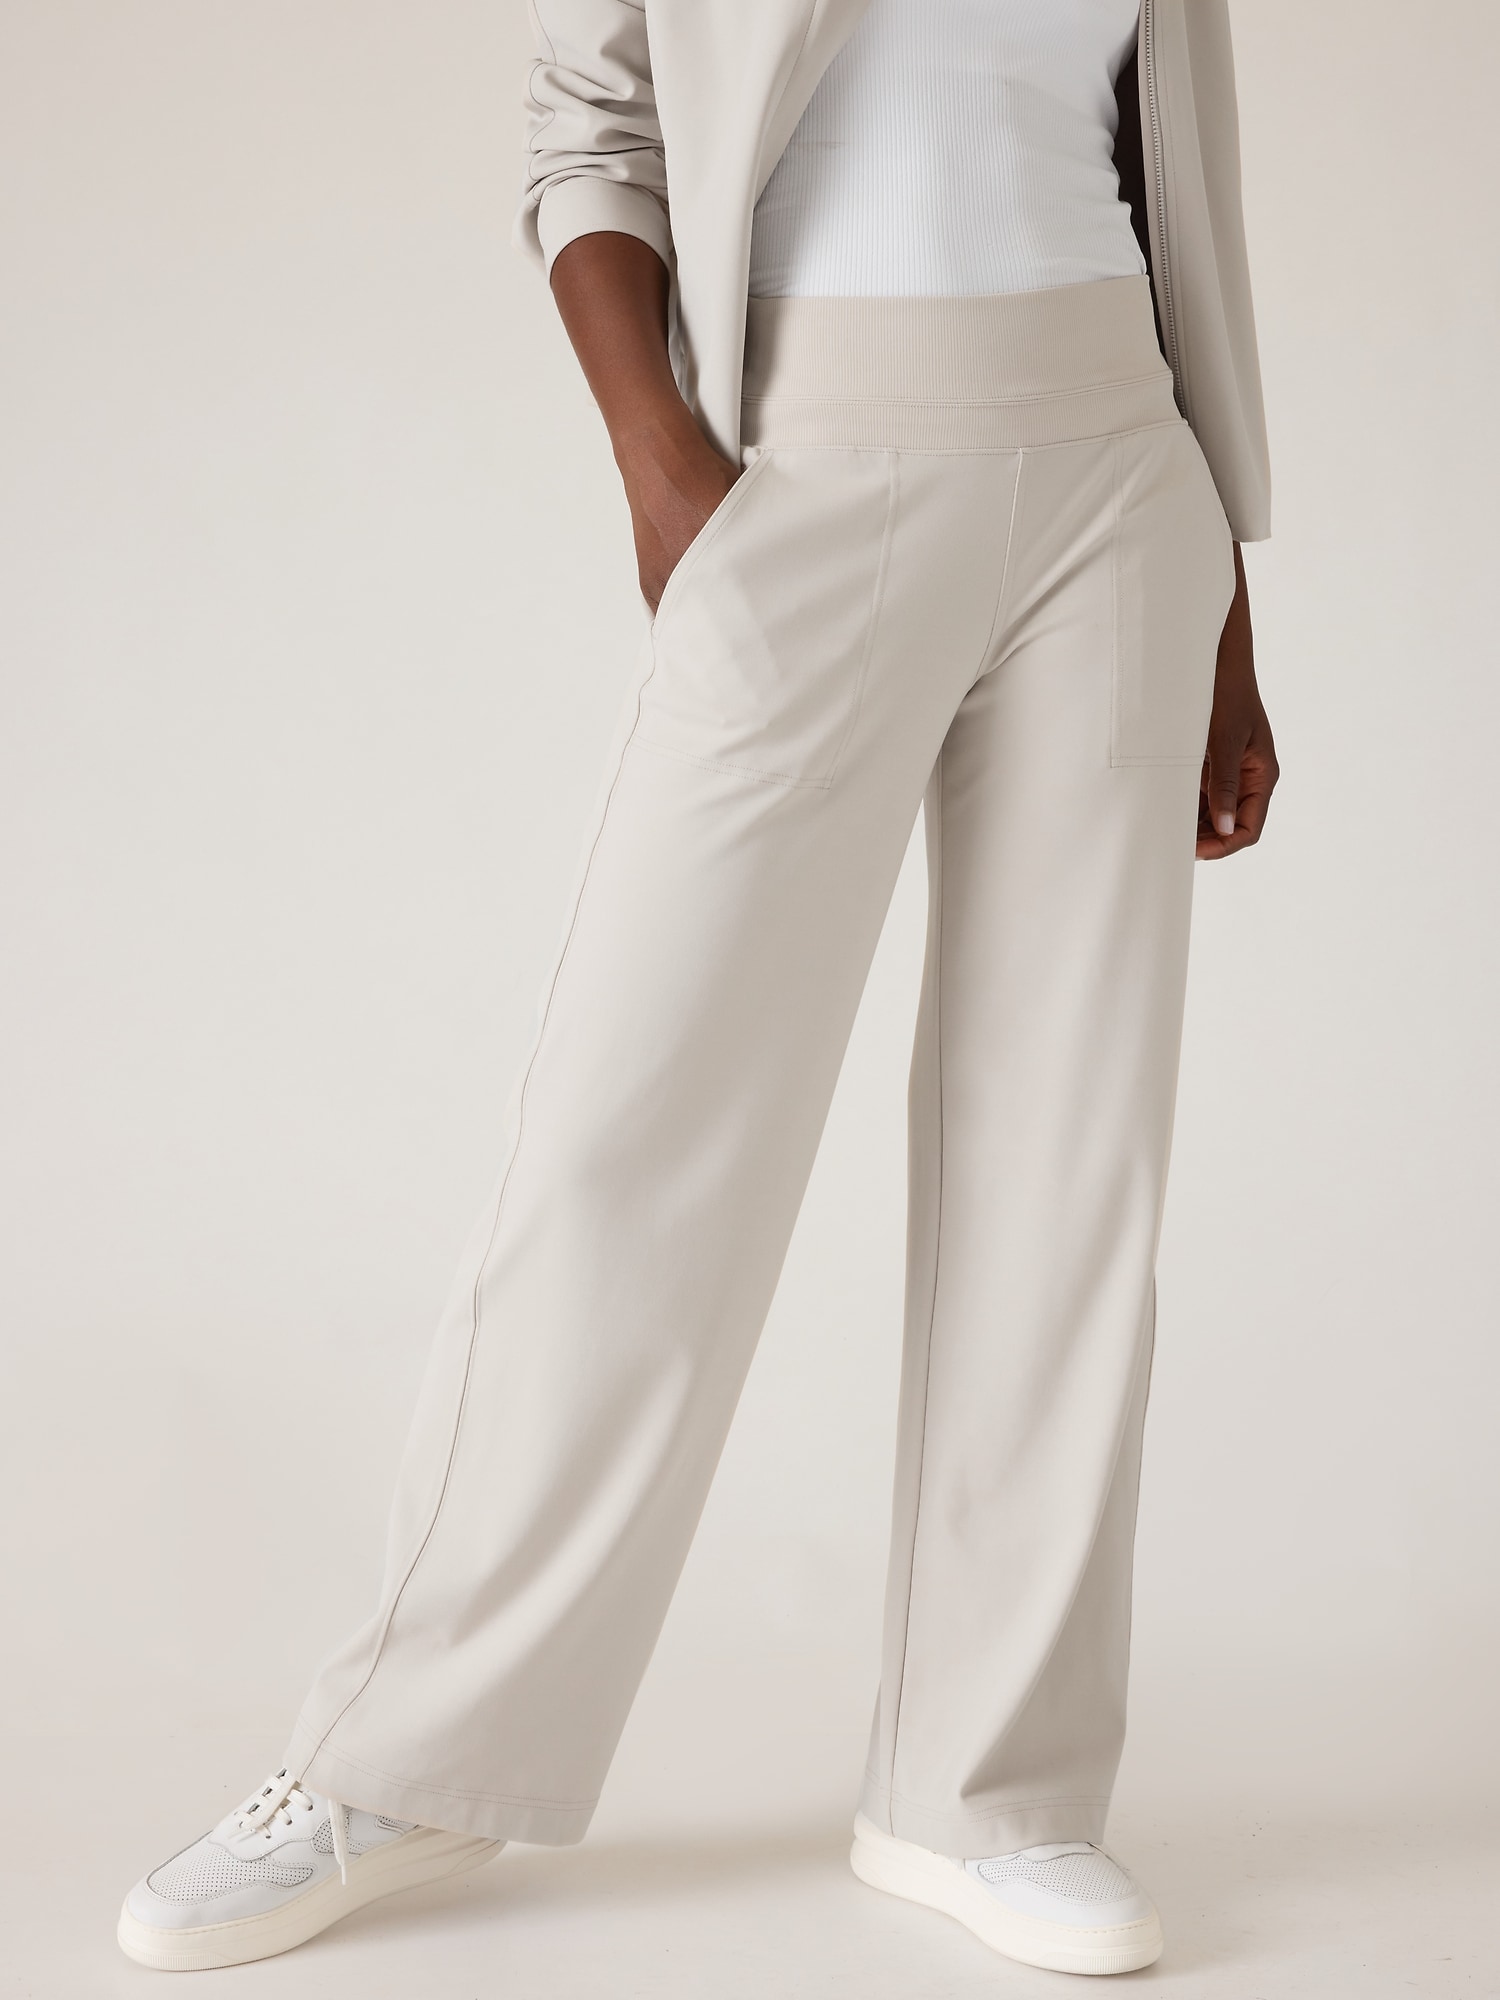 Buy LAASA Sports High-Waisted Palazzo Loose Fit Wide Leg Palazzo Lounge  Pant for Women Grey at